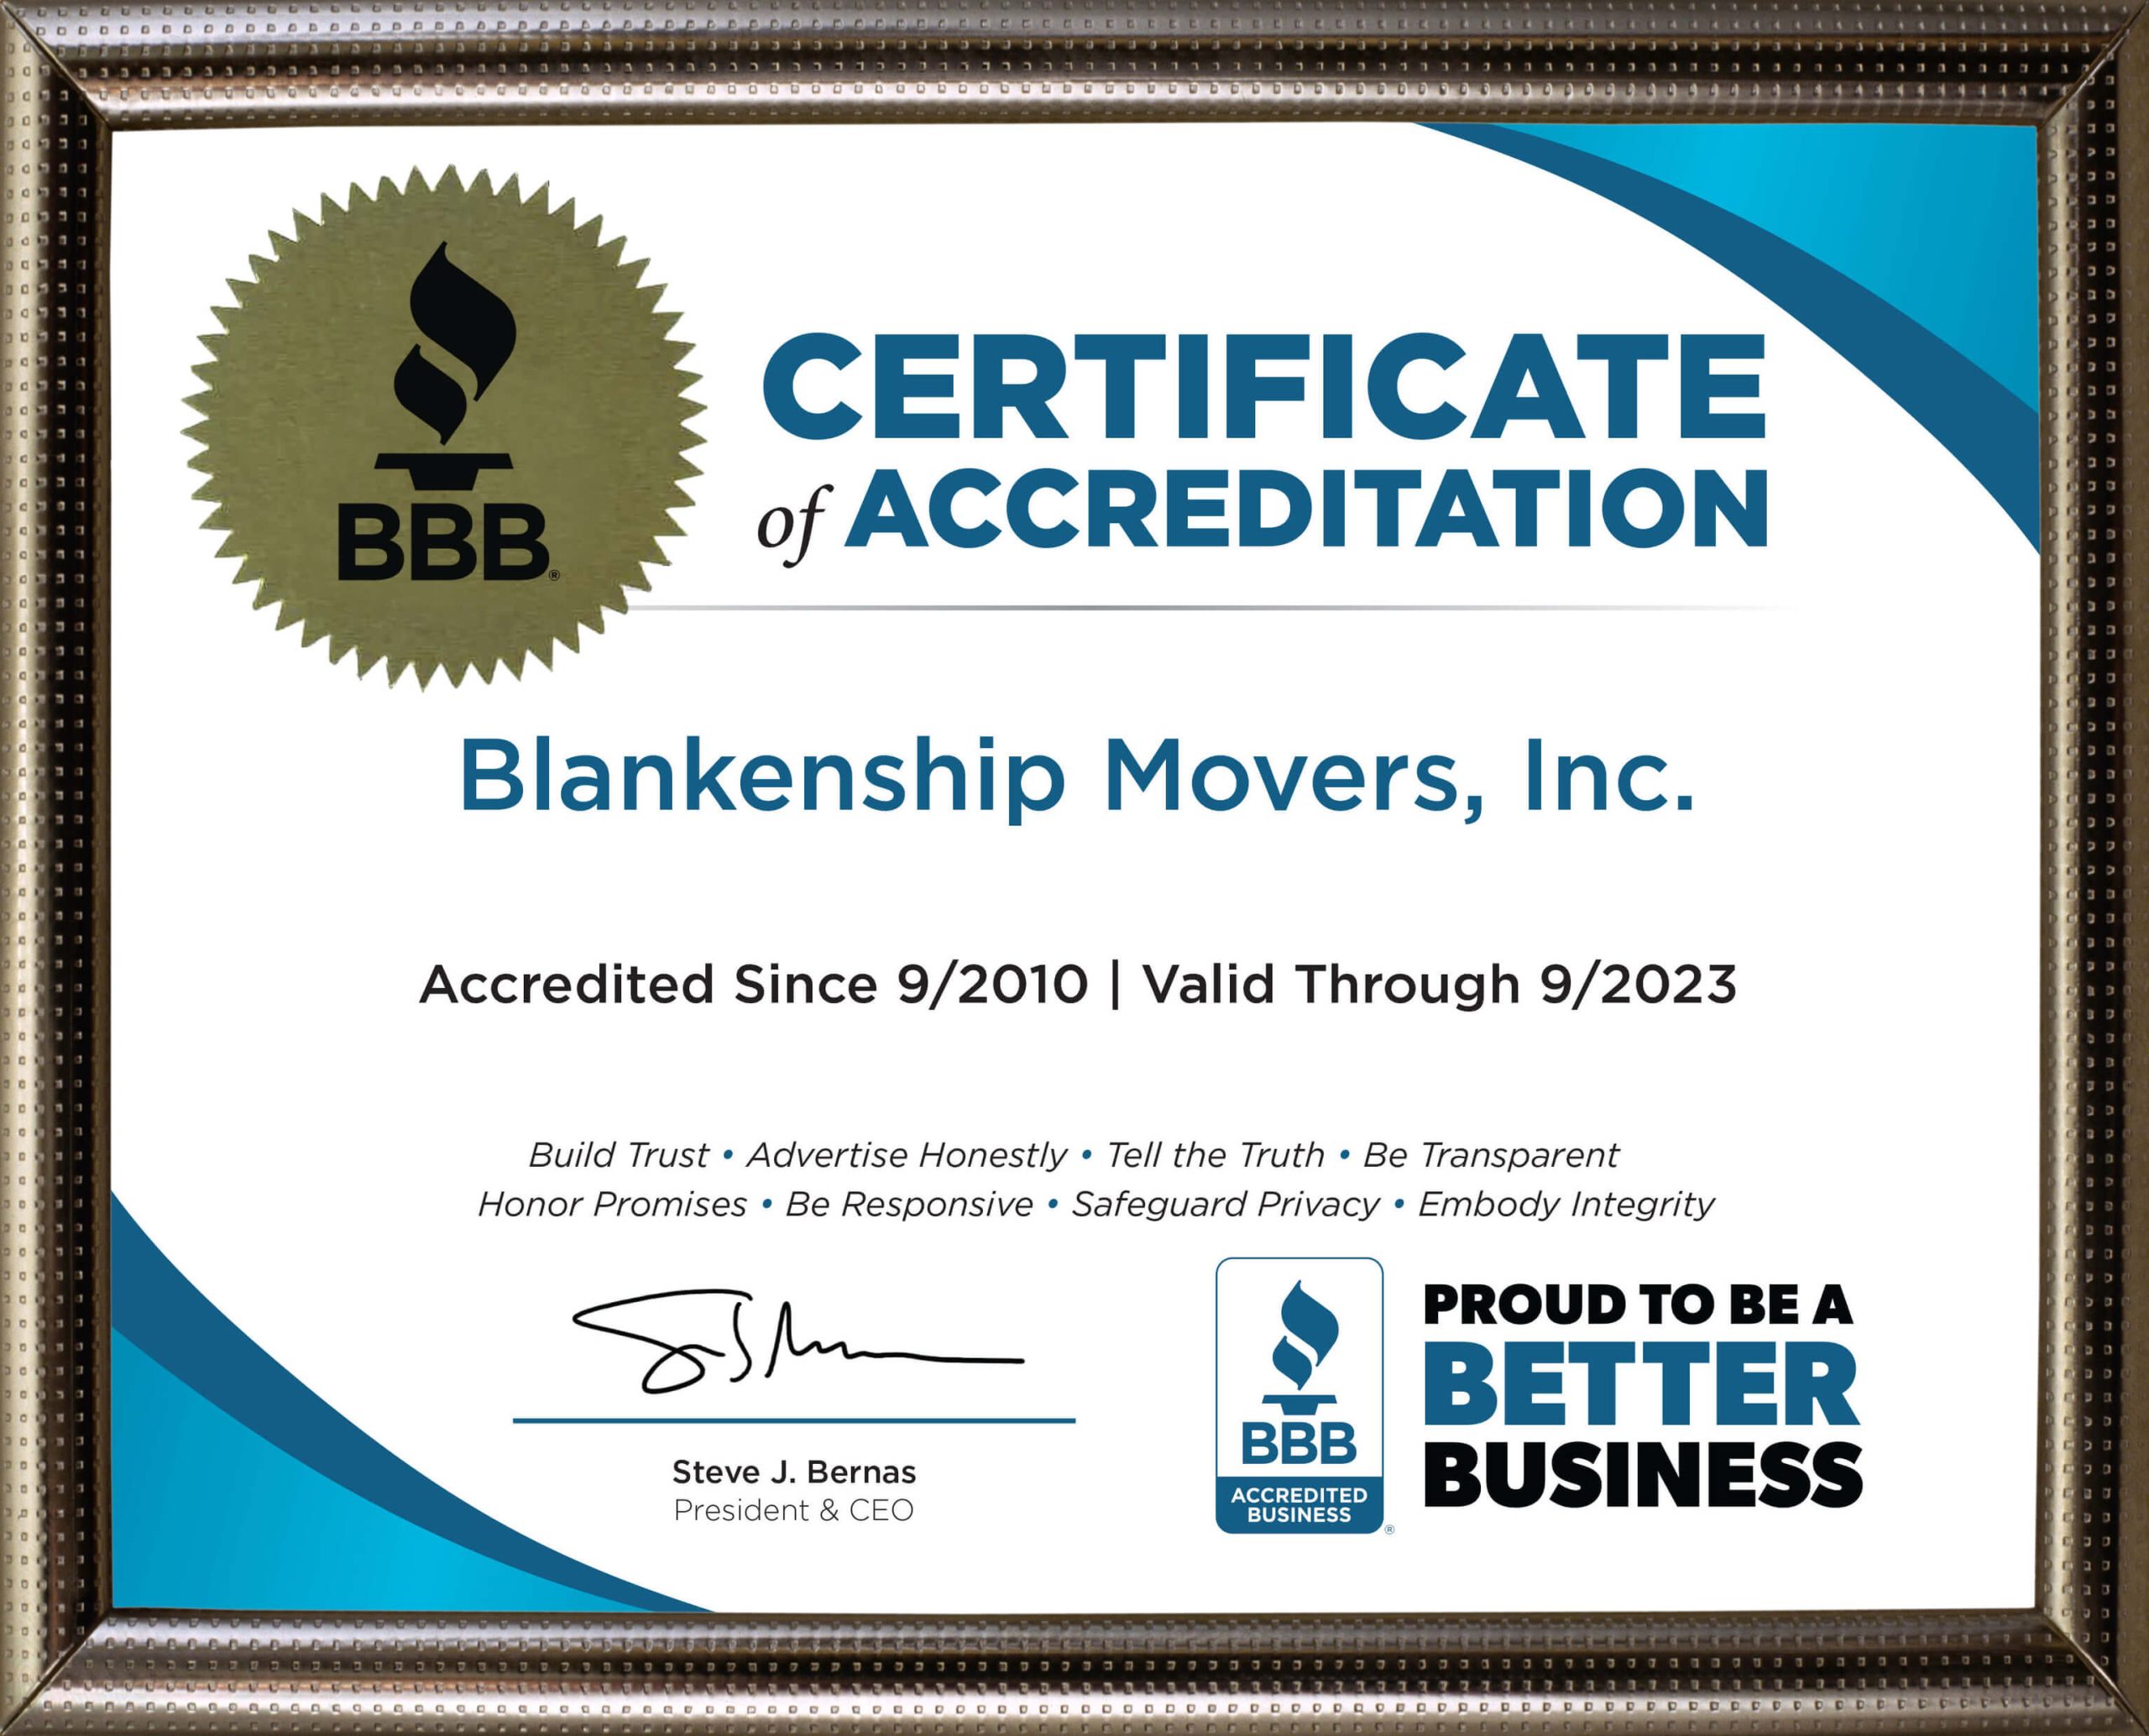 BBB Certificate 2022-2023 image